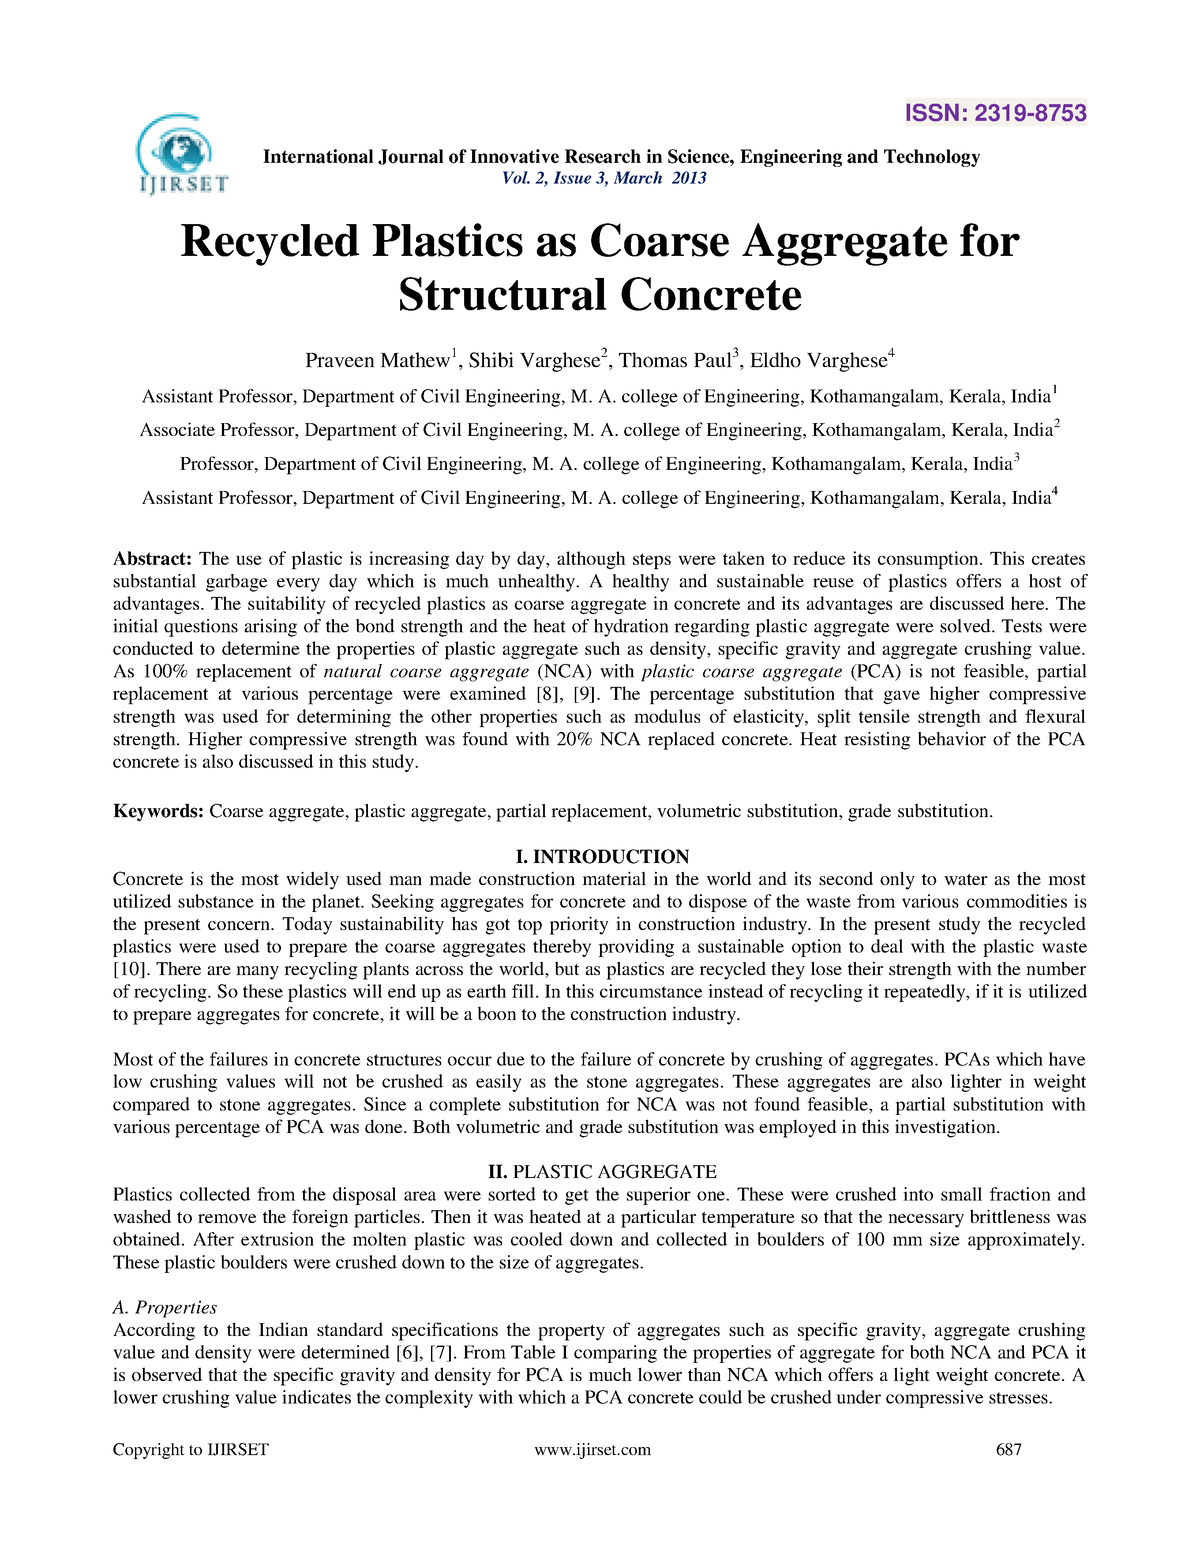 plastic recycling research paper